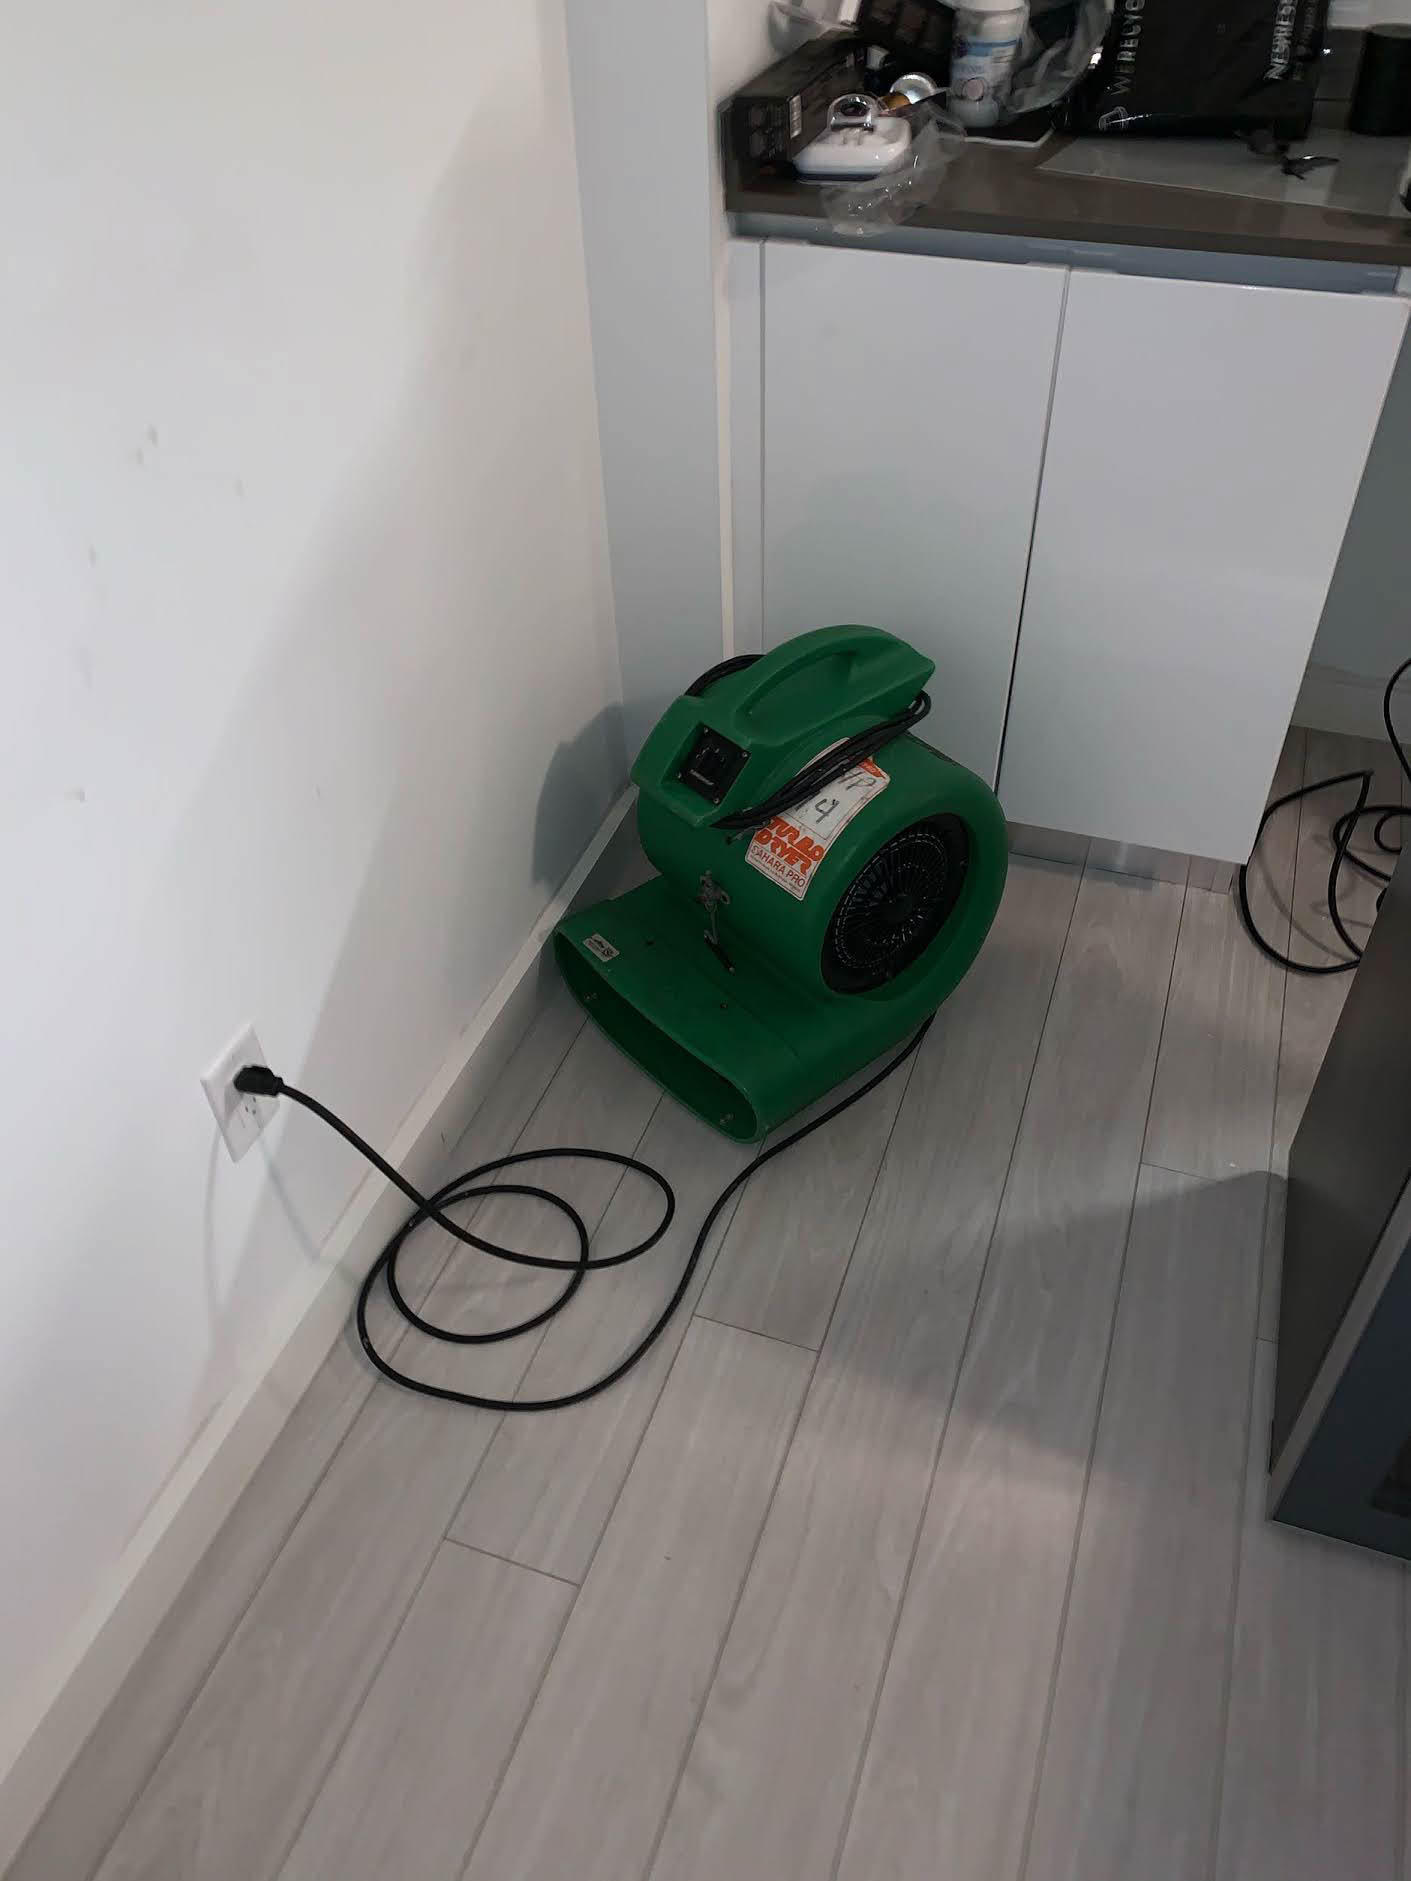 Setting up drying equip in a water damaged home. SERVPRO of Brickell is here to help.